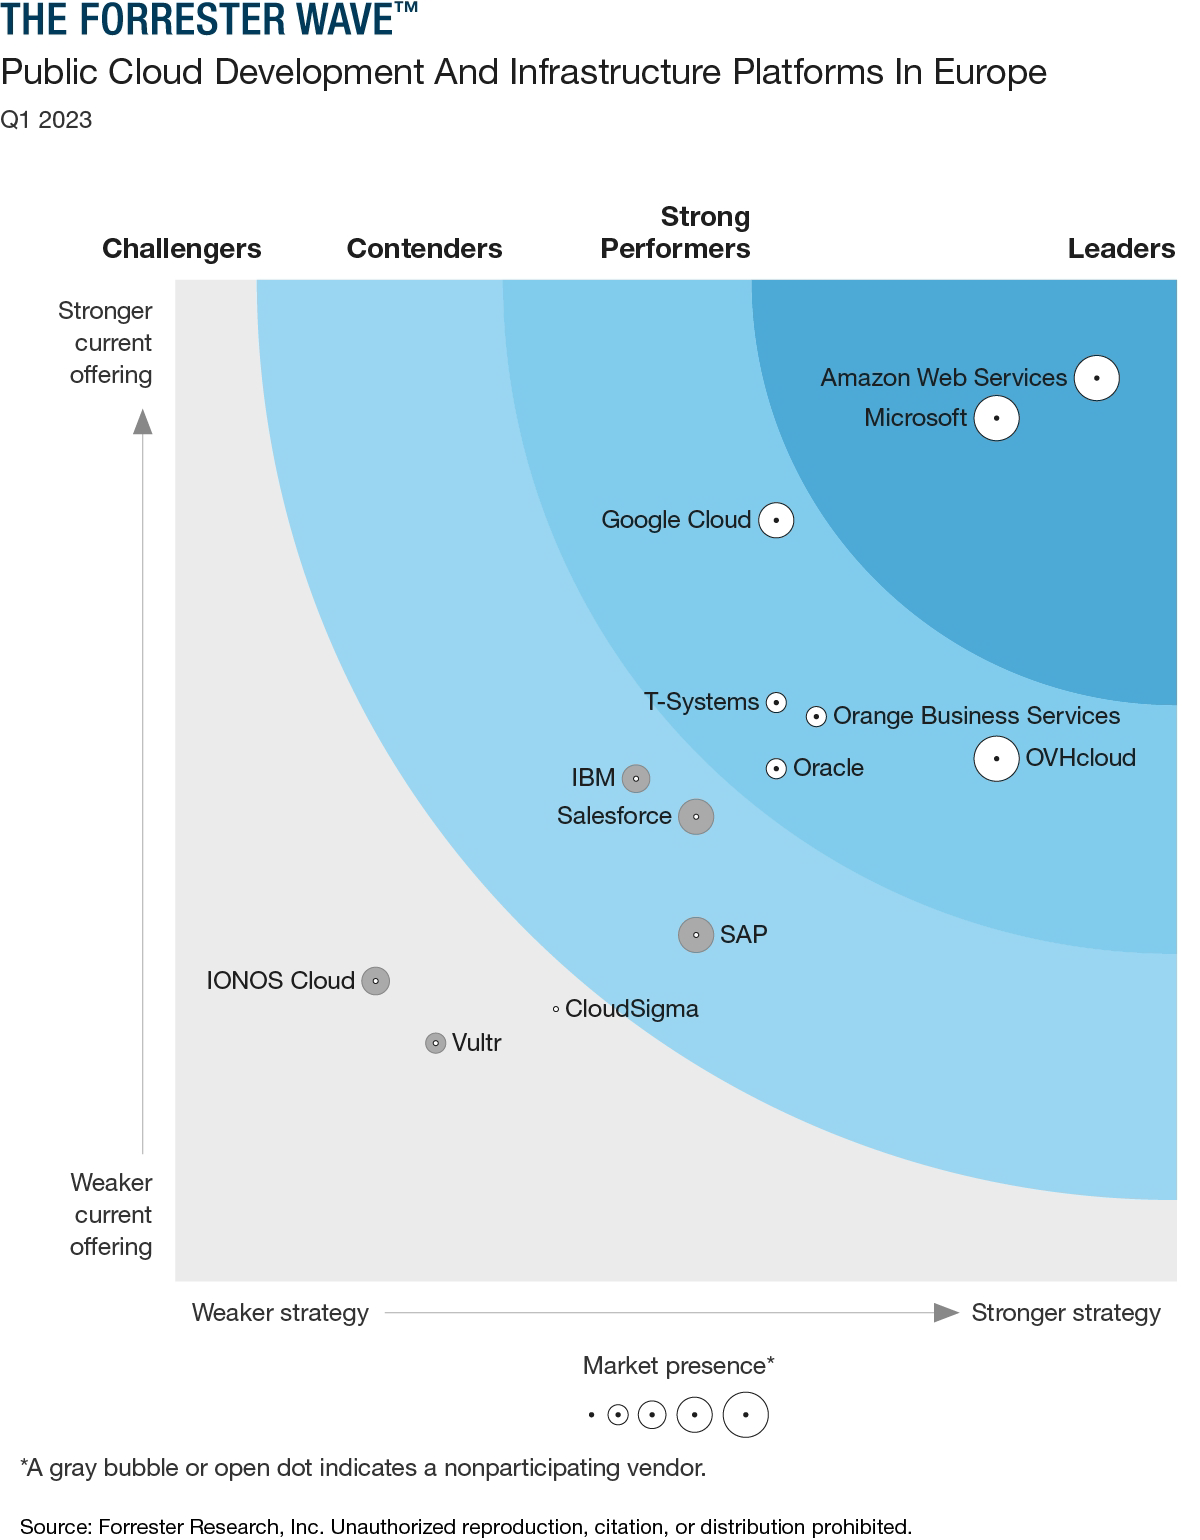 The Forrester Wave™: Public Cloud Development and Infrastructure Platforms in Europe, Q1 2023